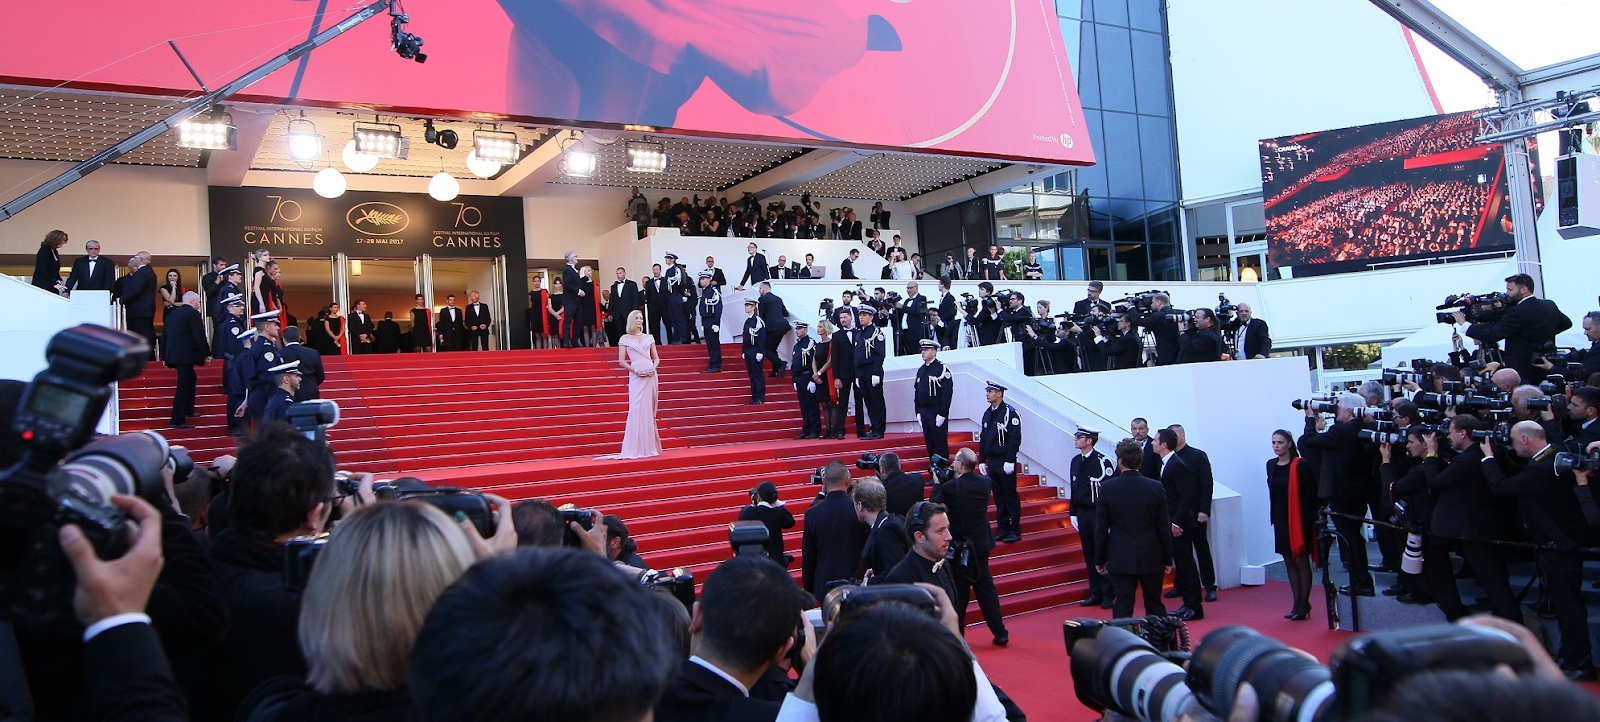 Tickets for Cannes film festival 